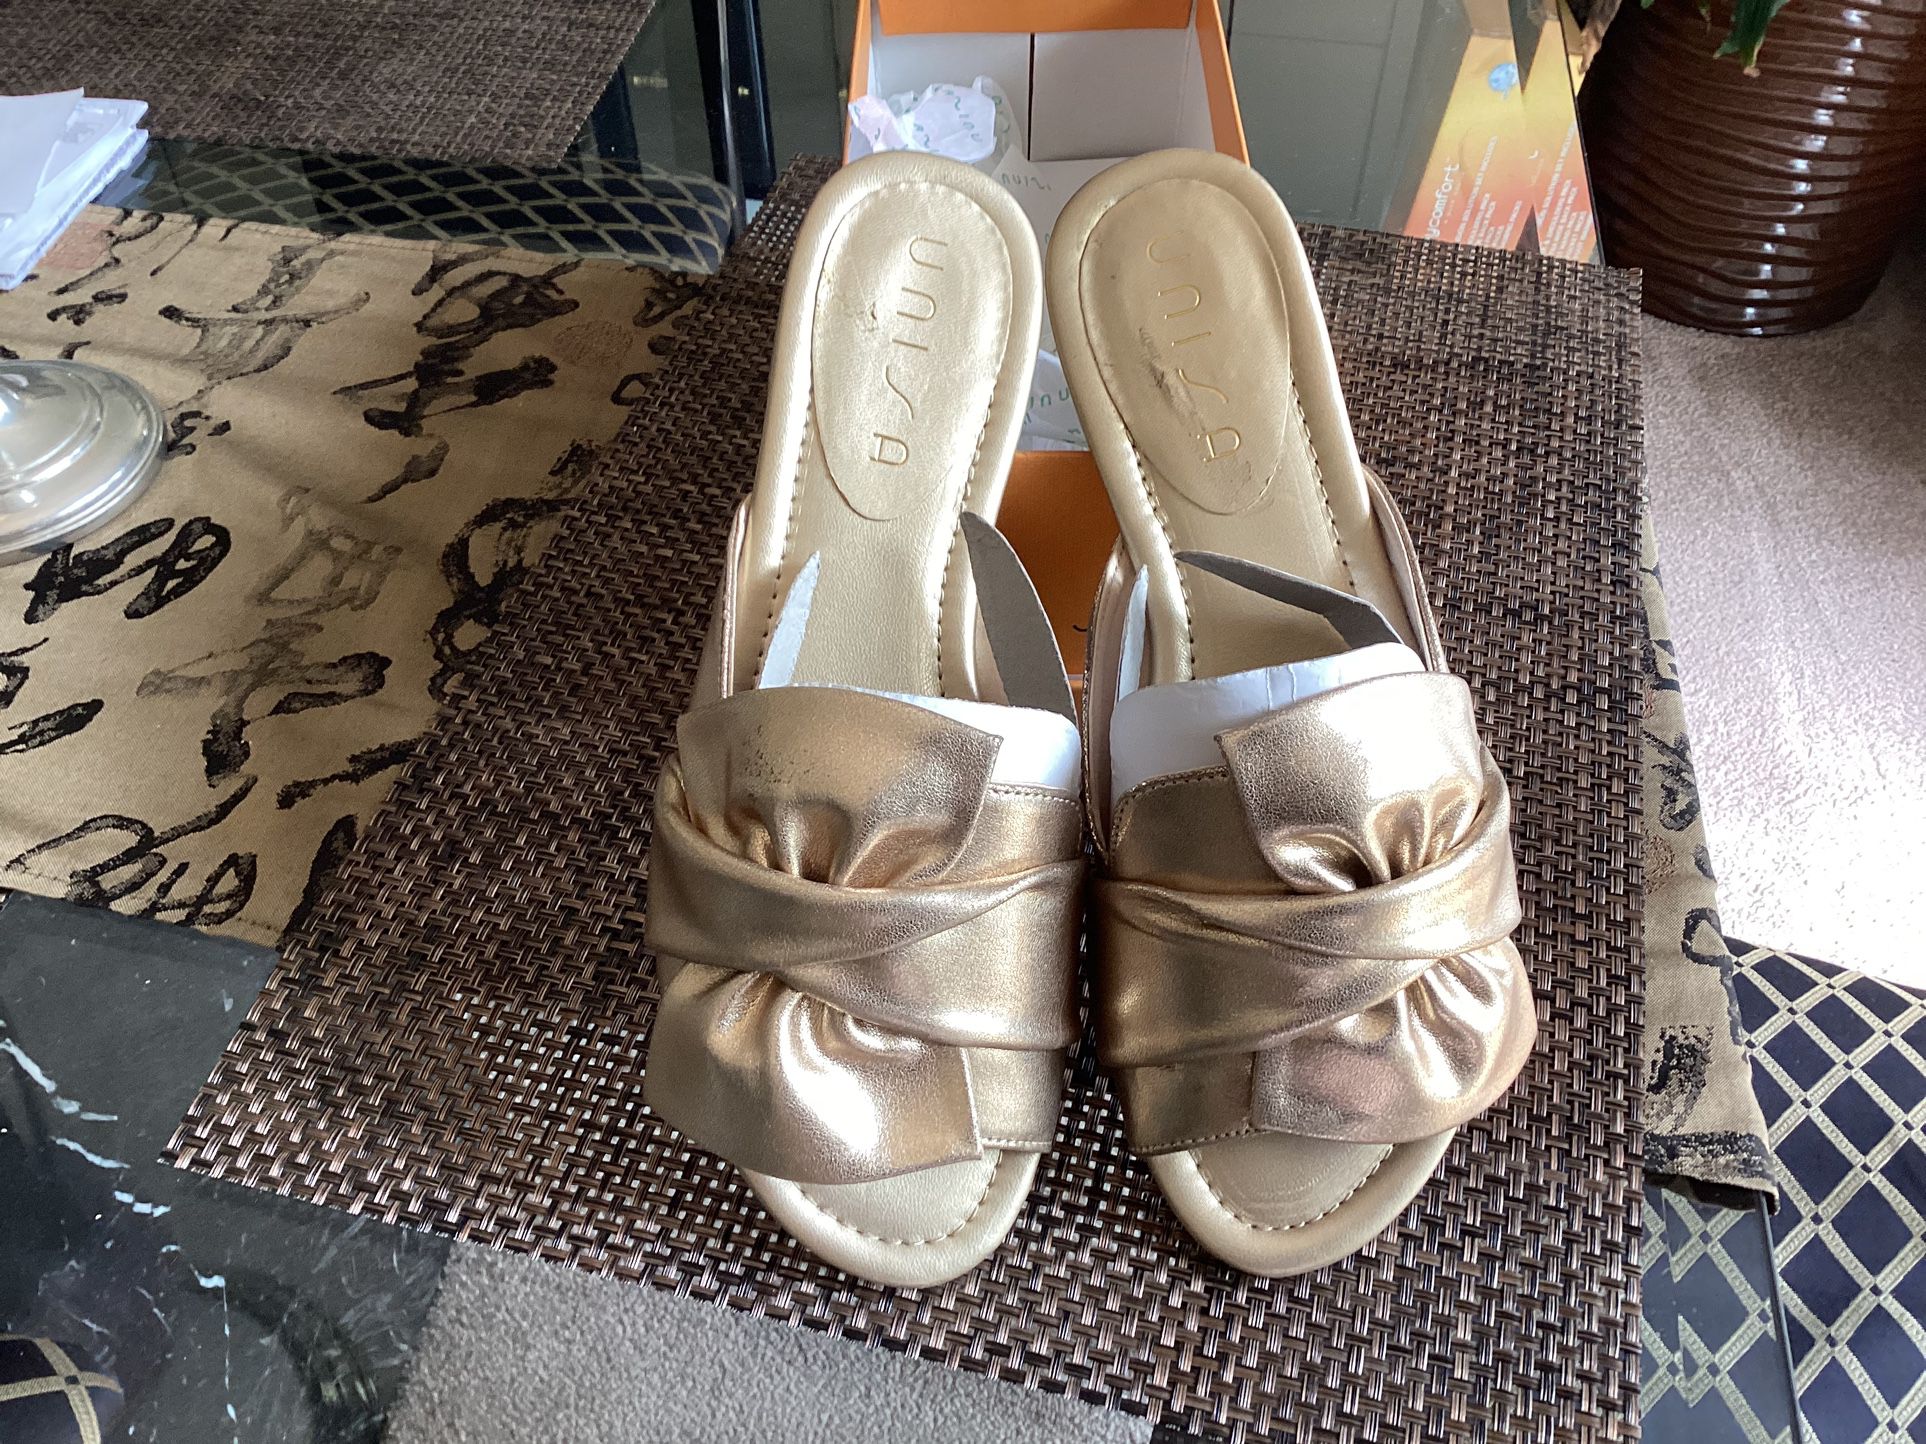 Unisa Gold Leather Sandals Size 7.5